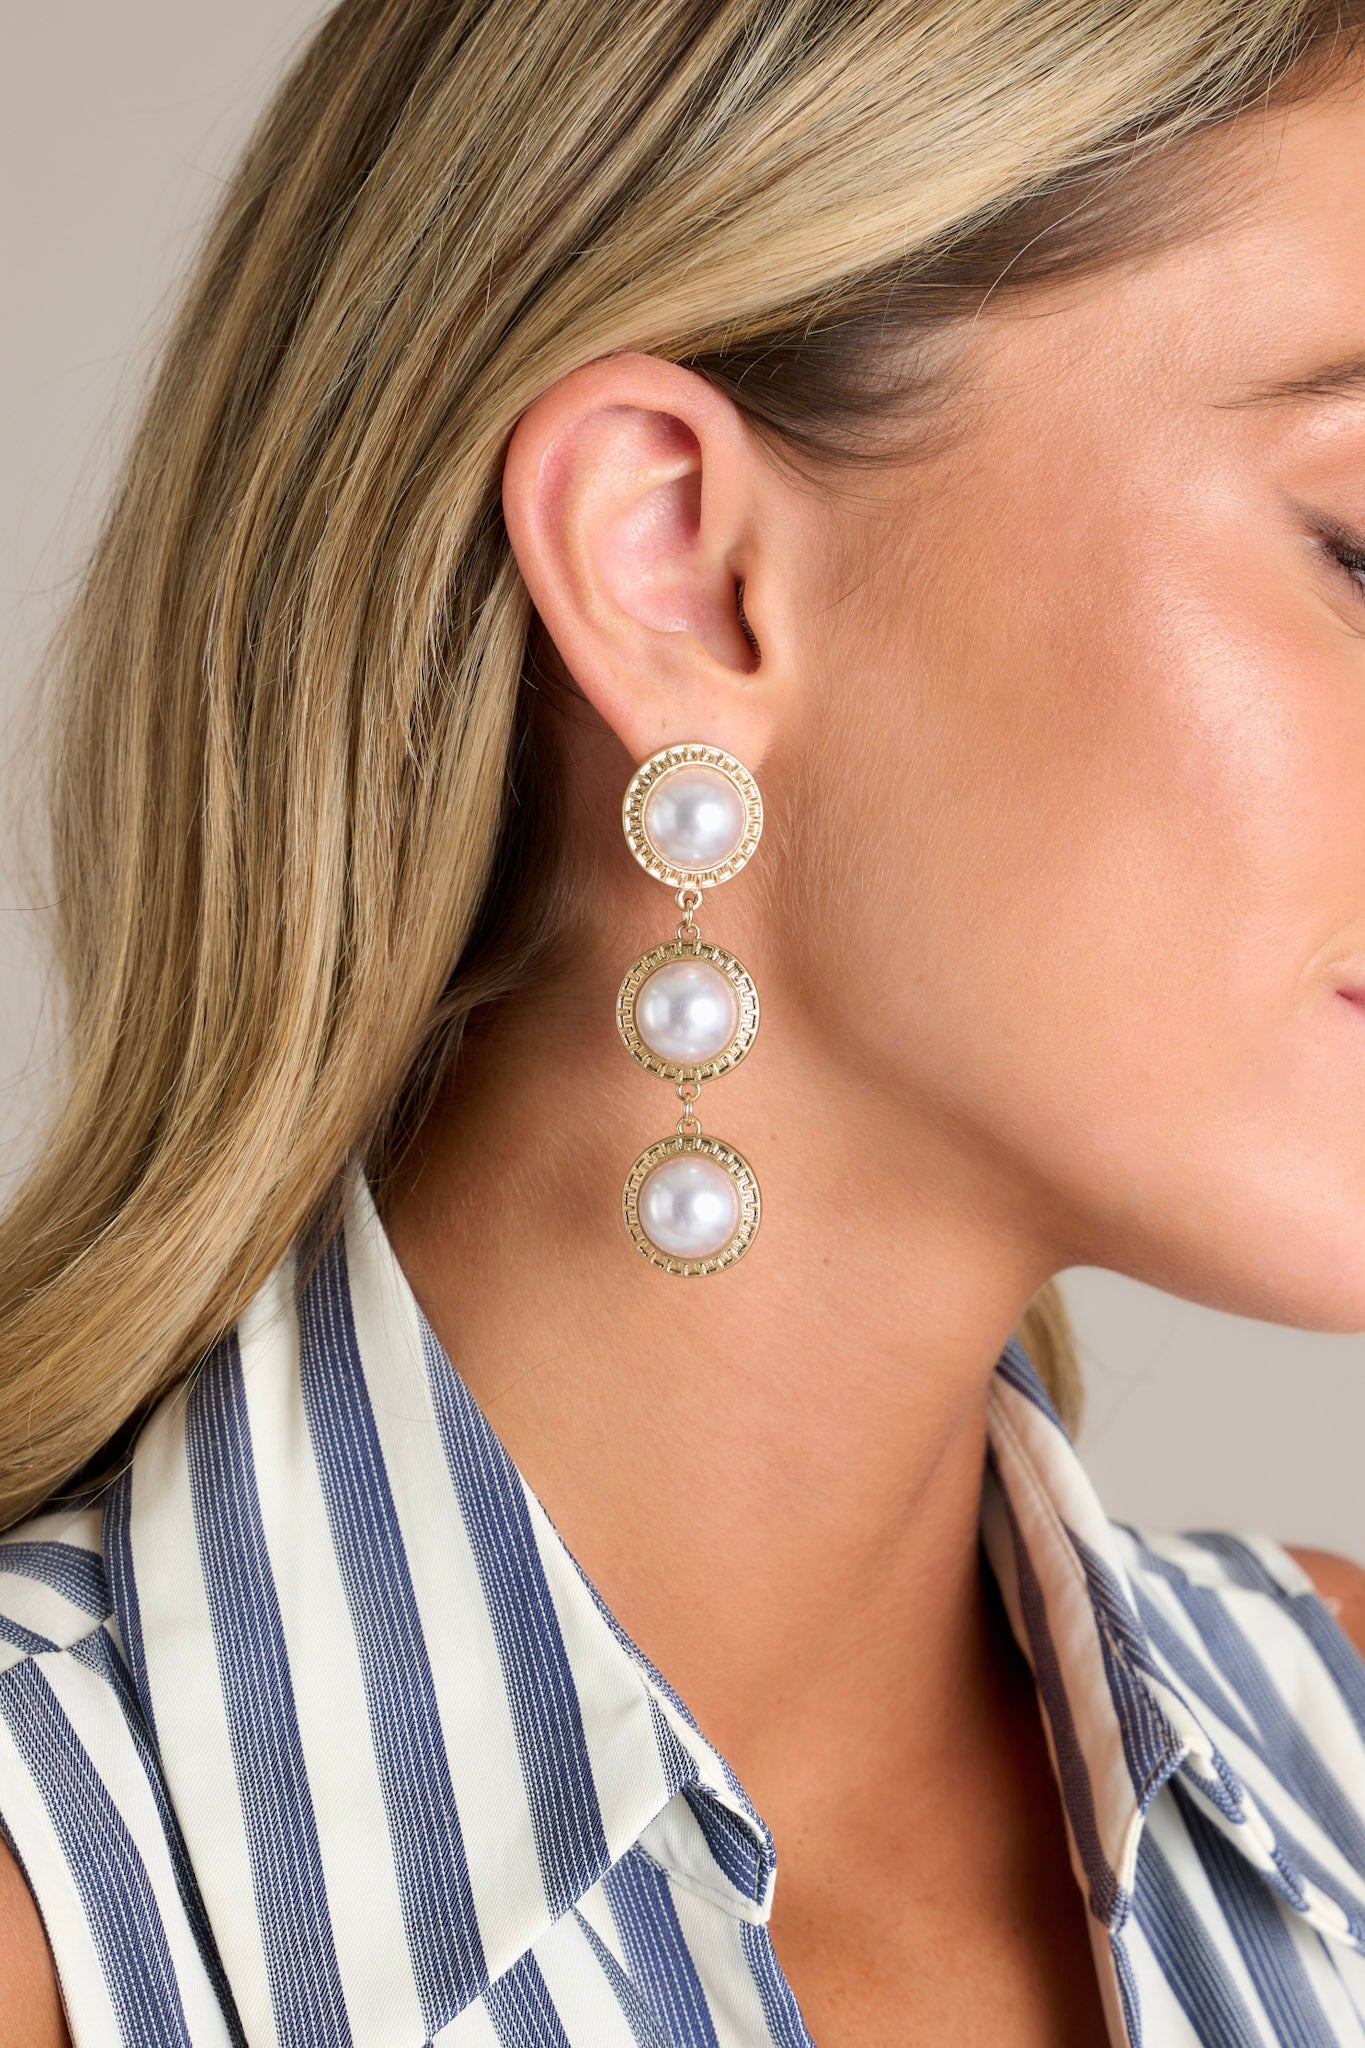 These gold pearl earrings feature three round hanging ivory faux pearls with textured gold borders, and secure post backings.